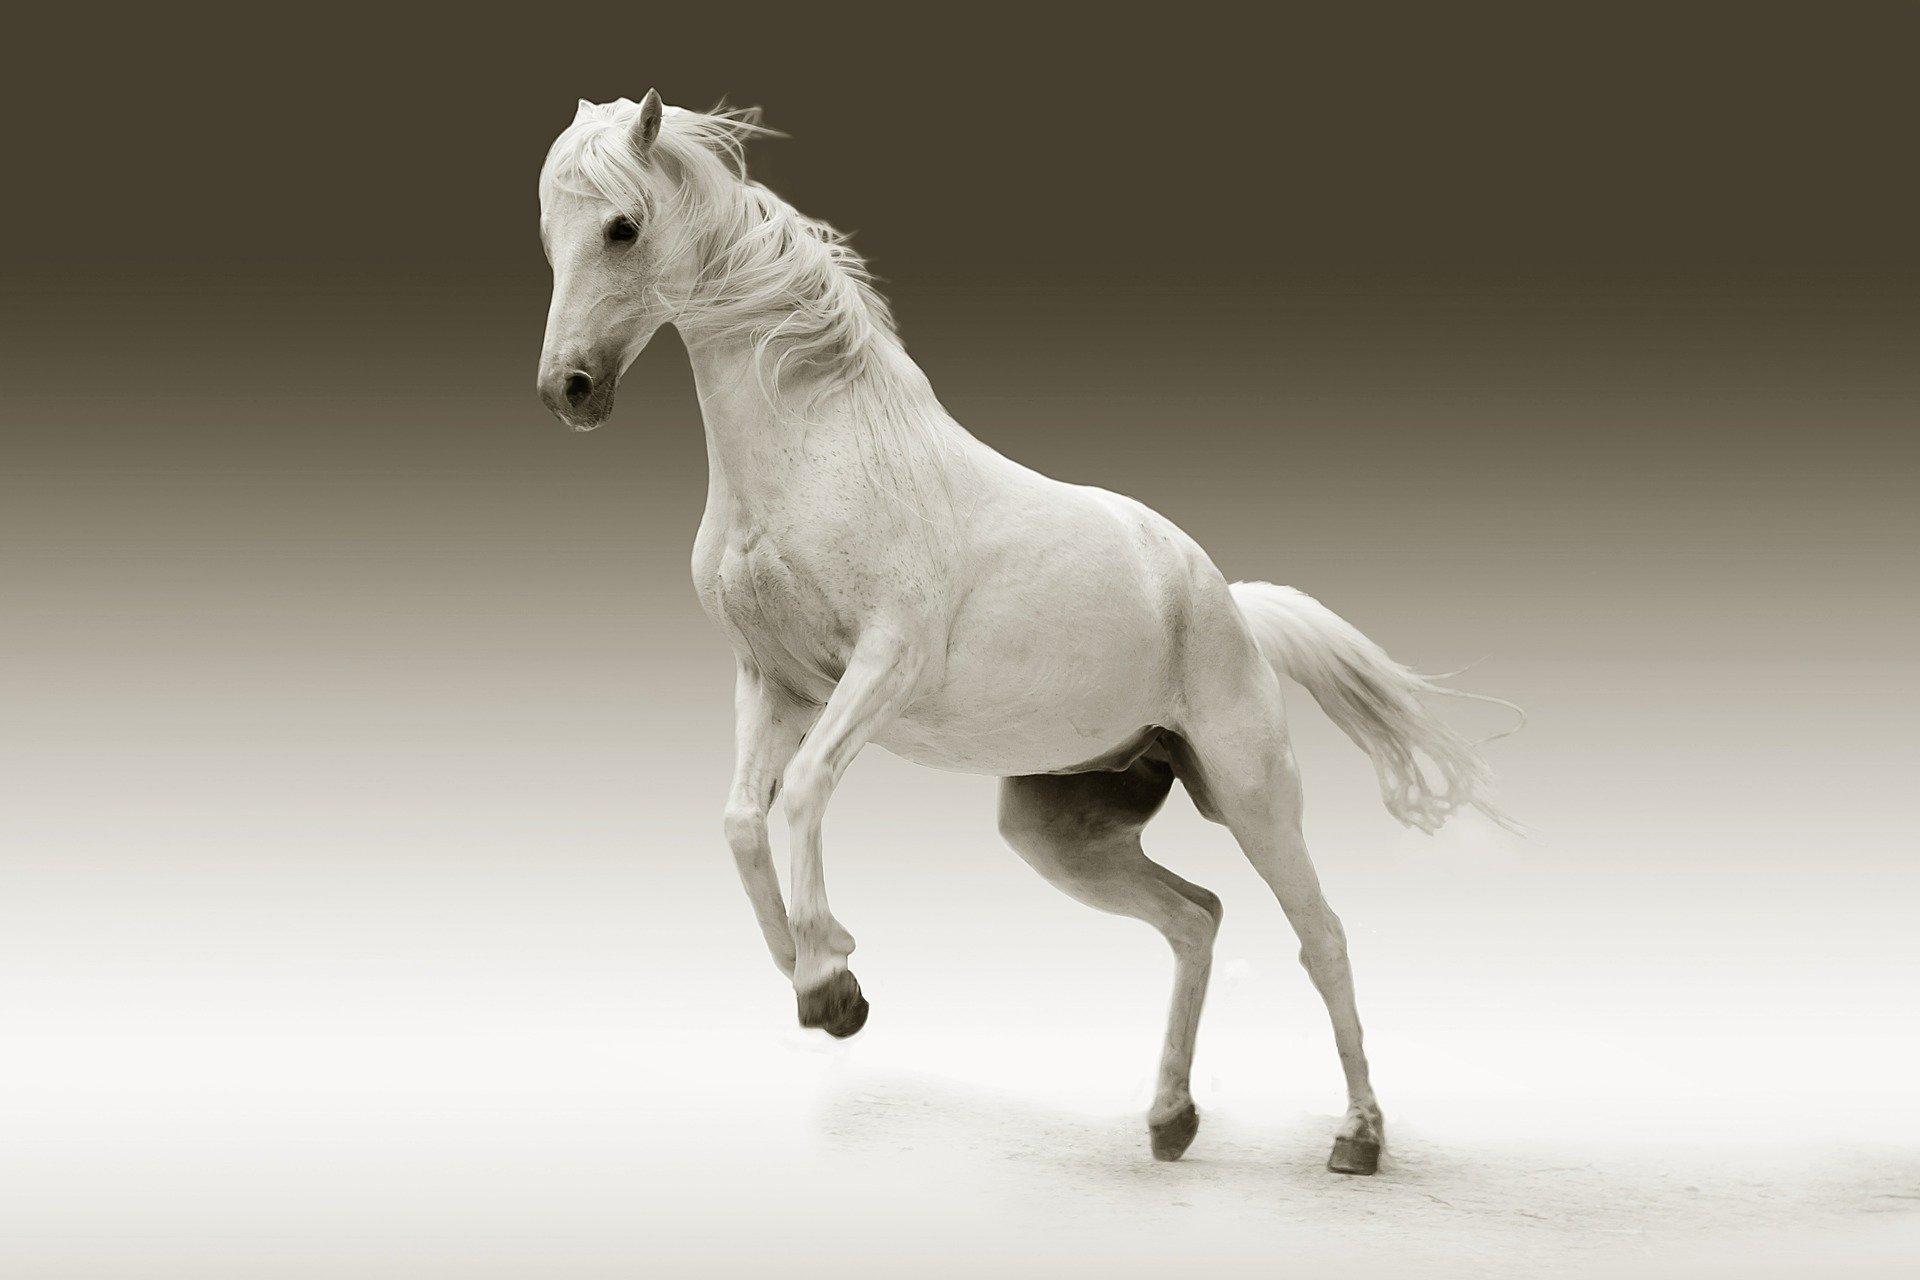 Pictured - A white mare horse | Source: Pixabay